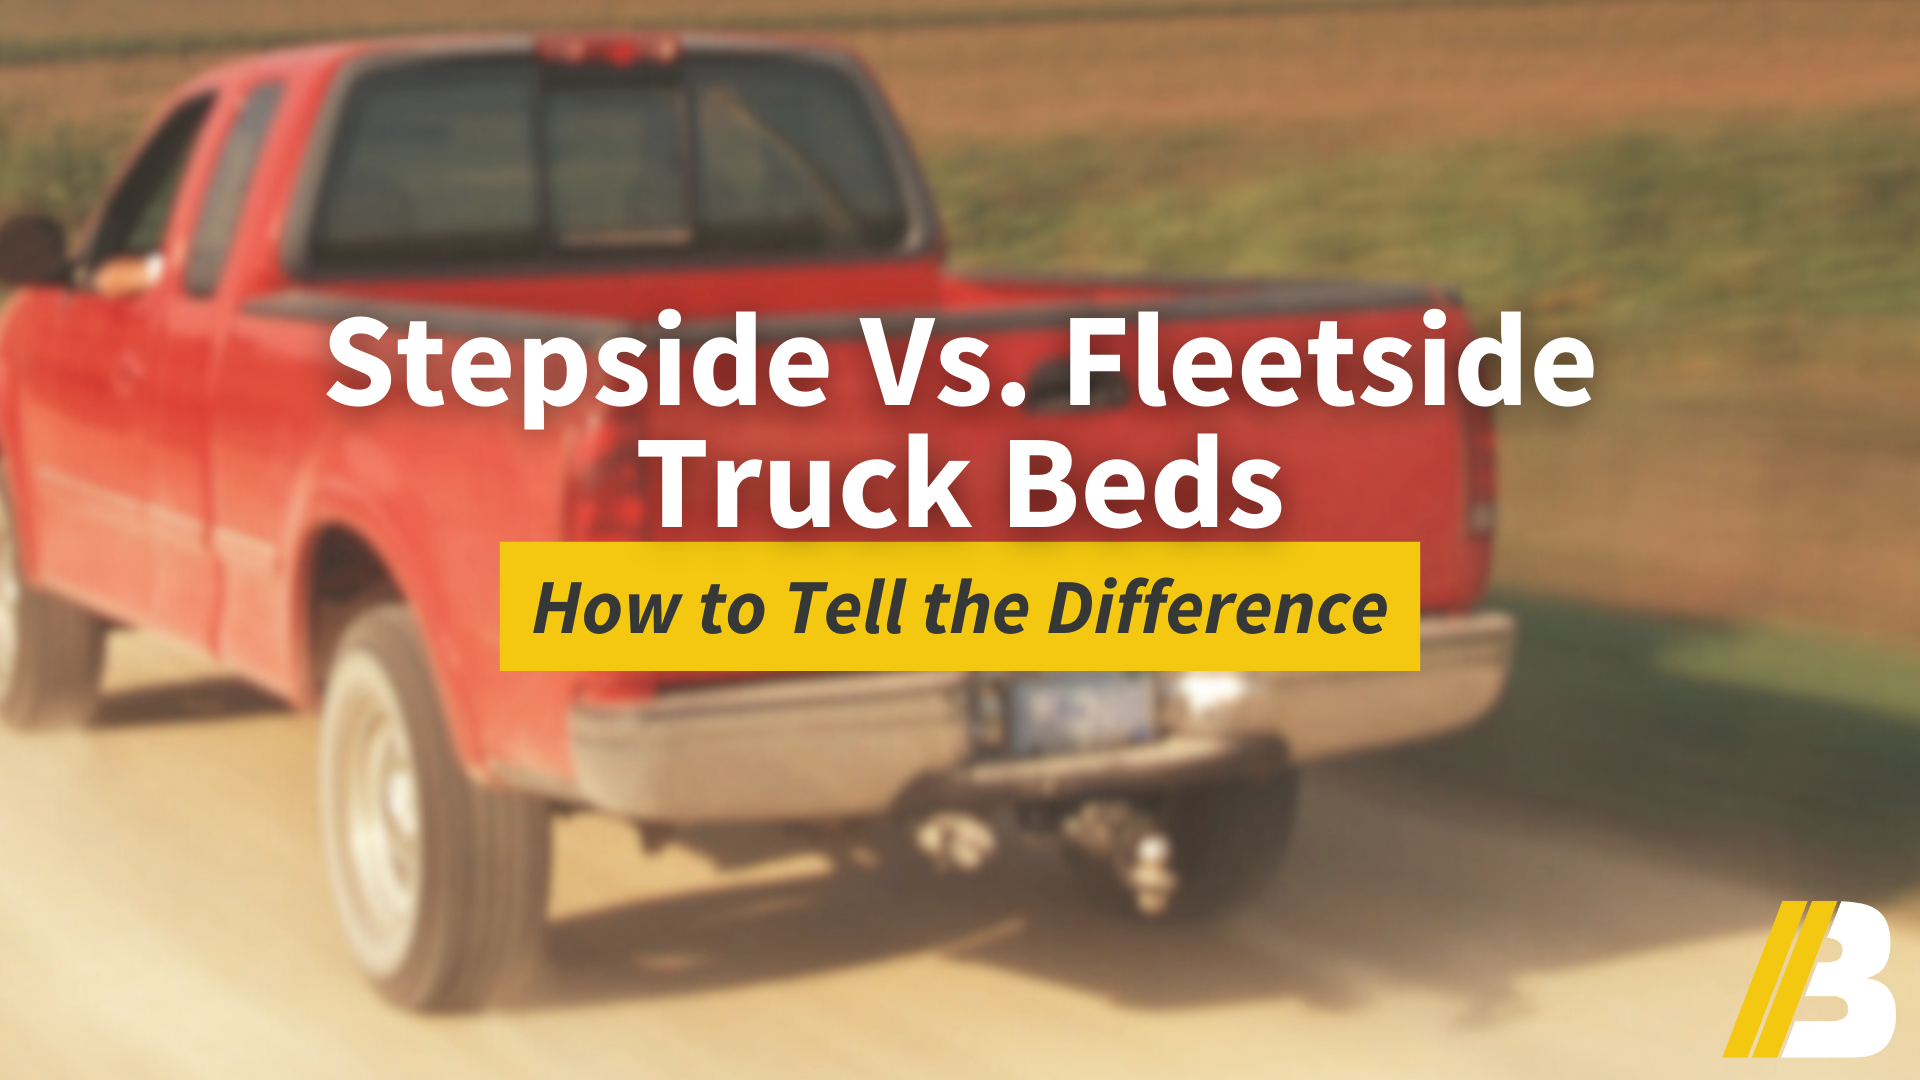 How to Tell the Difference: Stepside vs. Fleetside Truck Beds